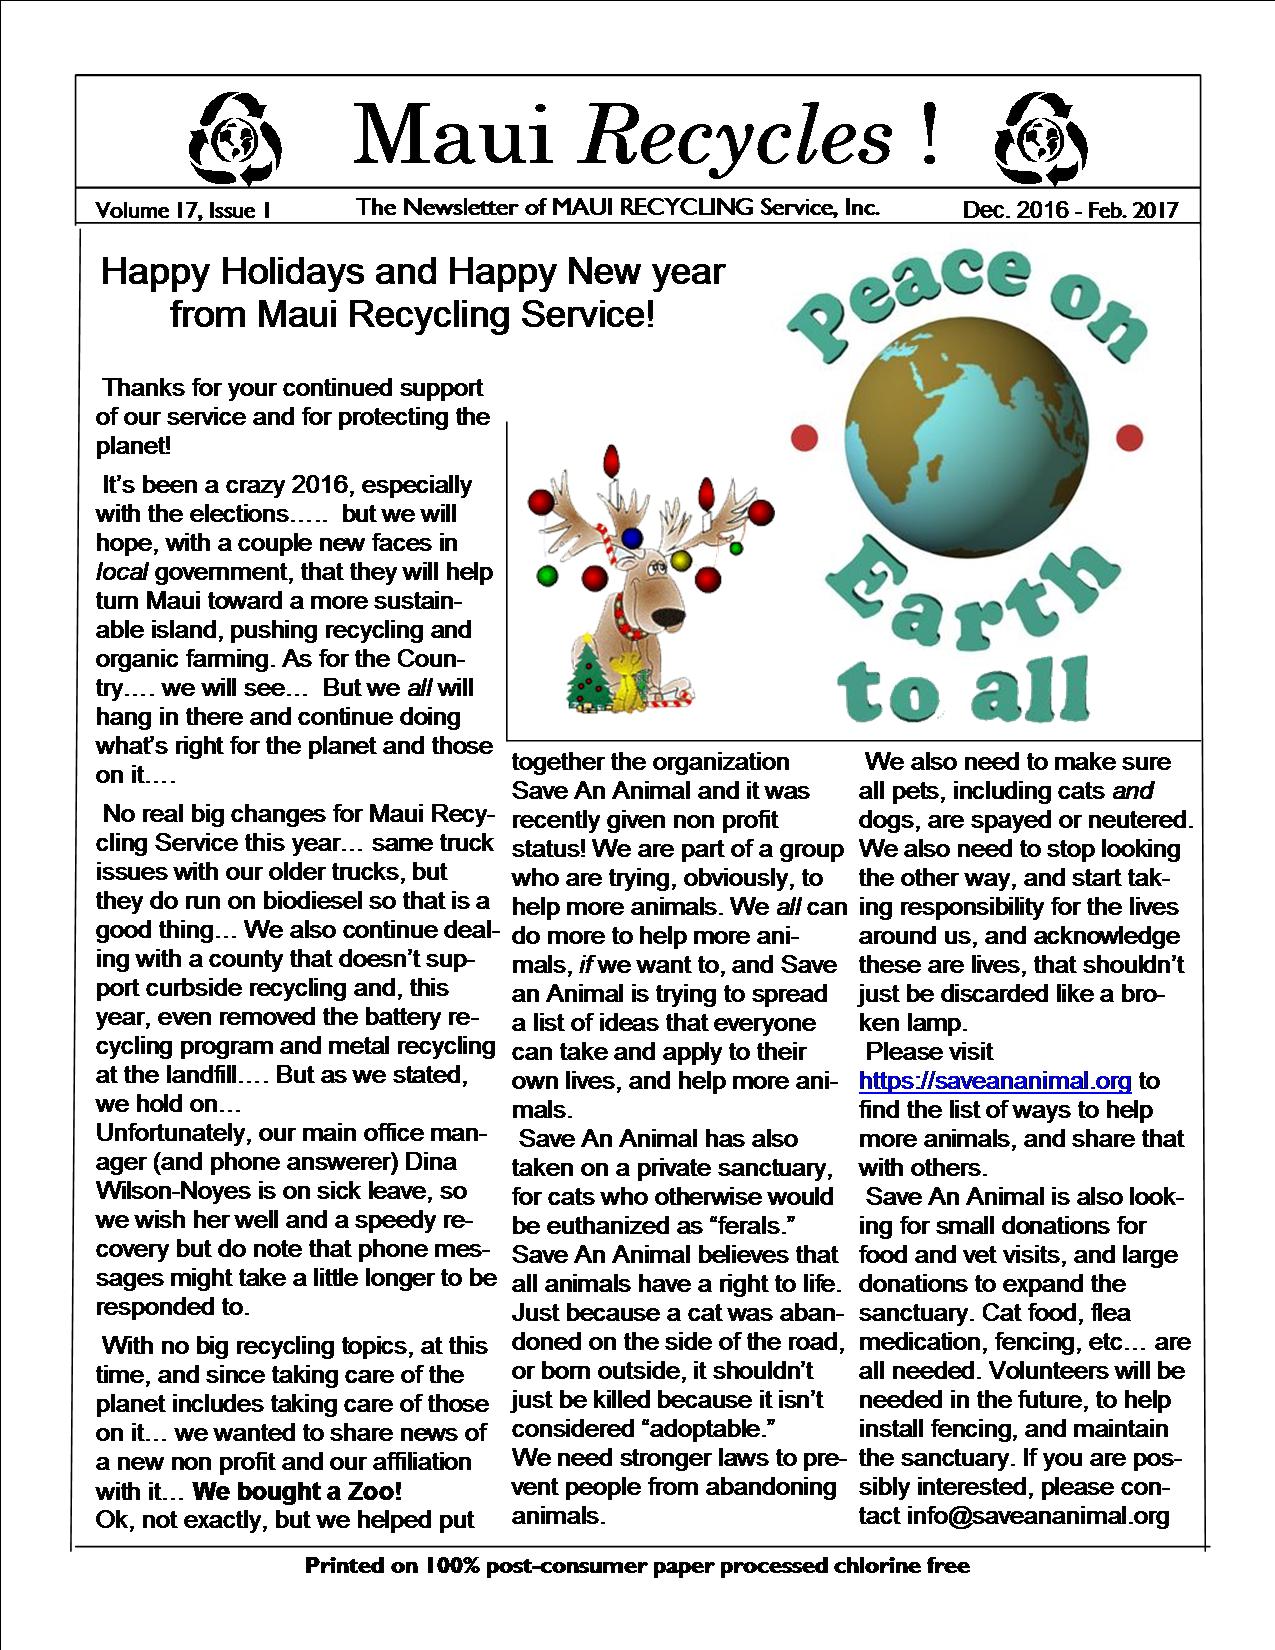 Maui Recycling Service Newsletter Dec 2016 